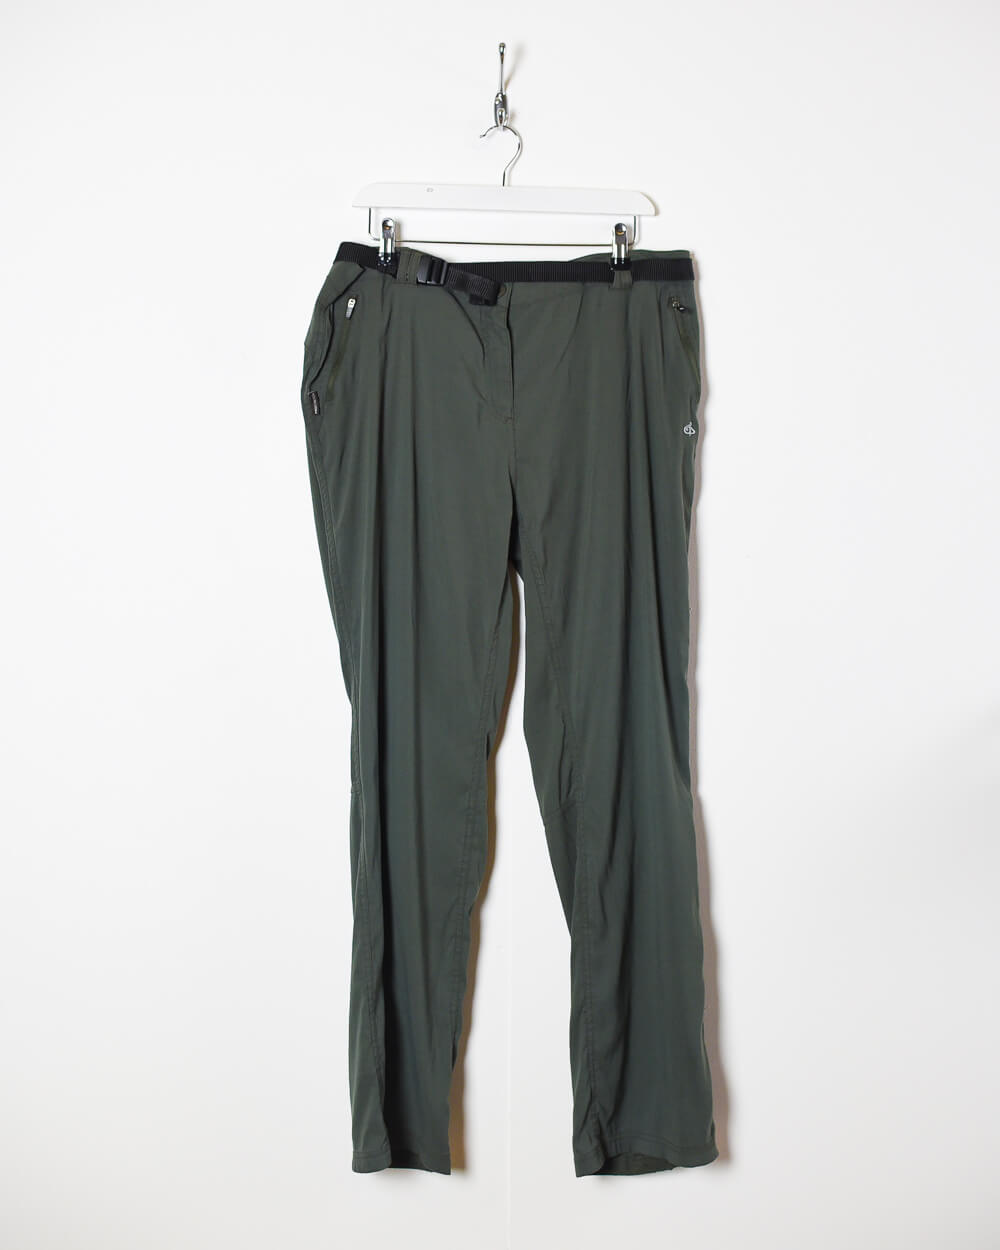 Green Craghoppers Women's Trousers - X-Large 